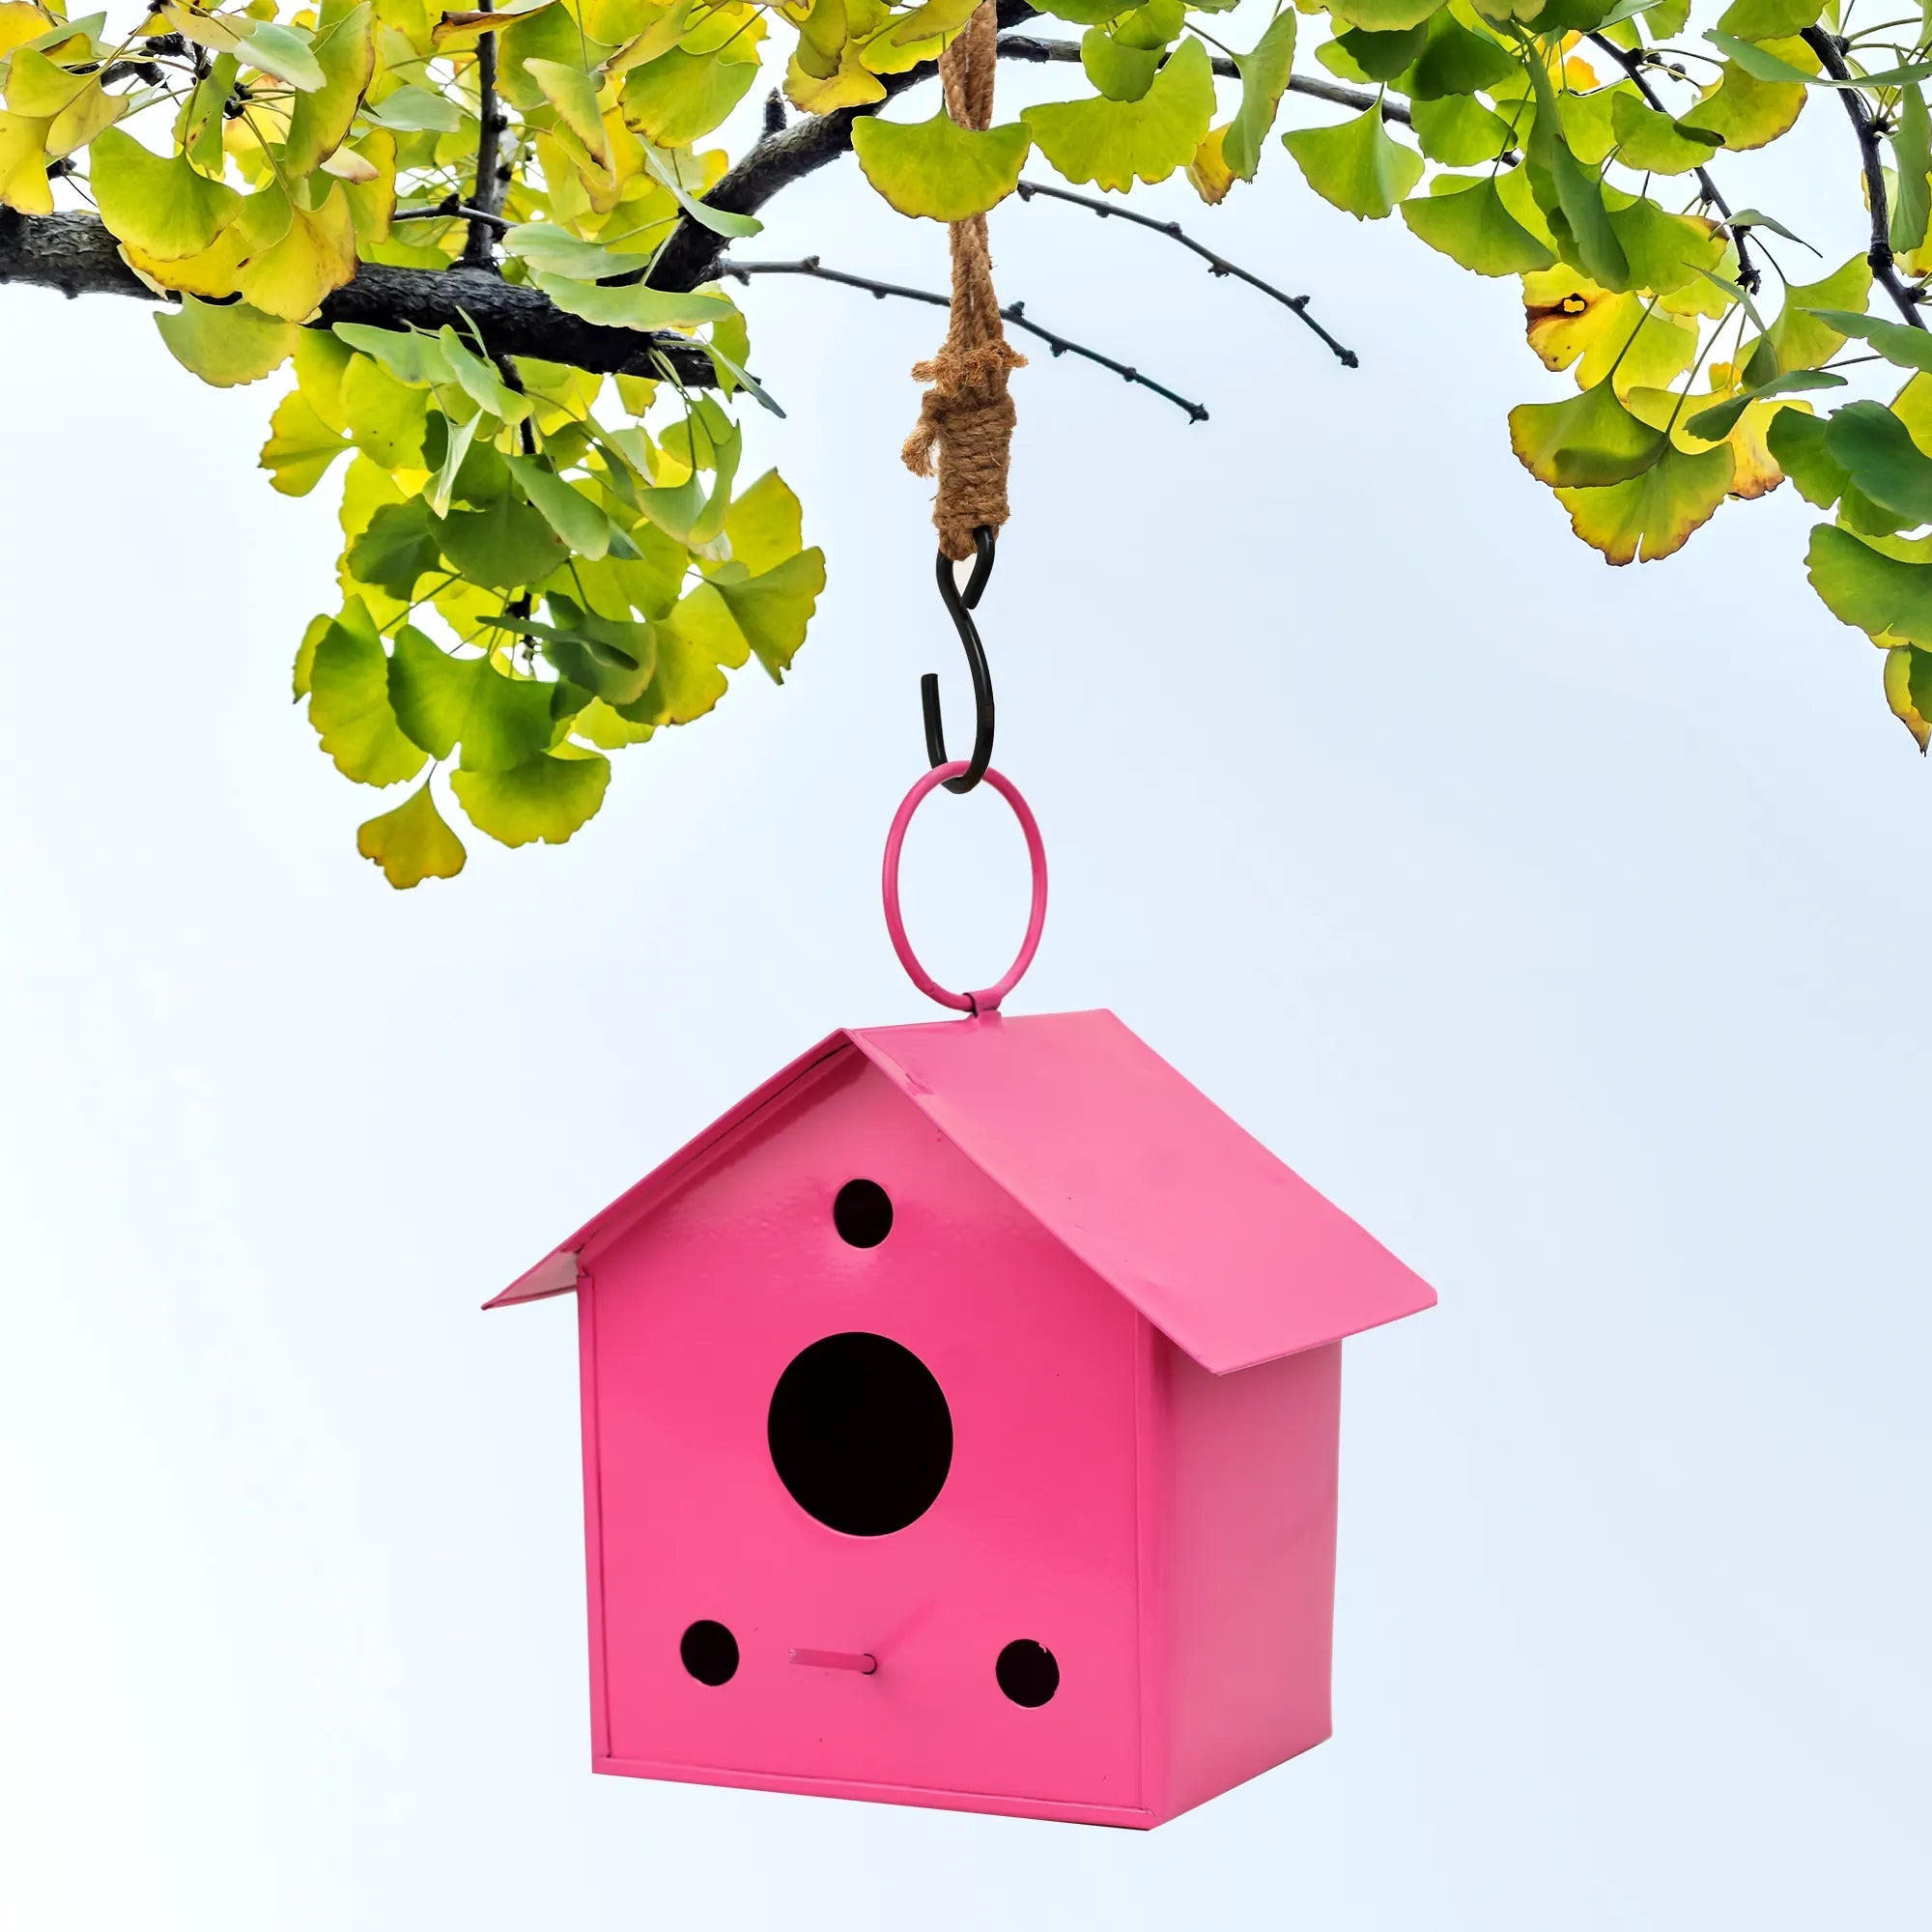 Colorful Metal Hanging Bird House-Set of 3 Oval Balcony Hanging Pot Urban Plant 